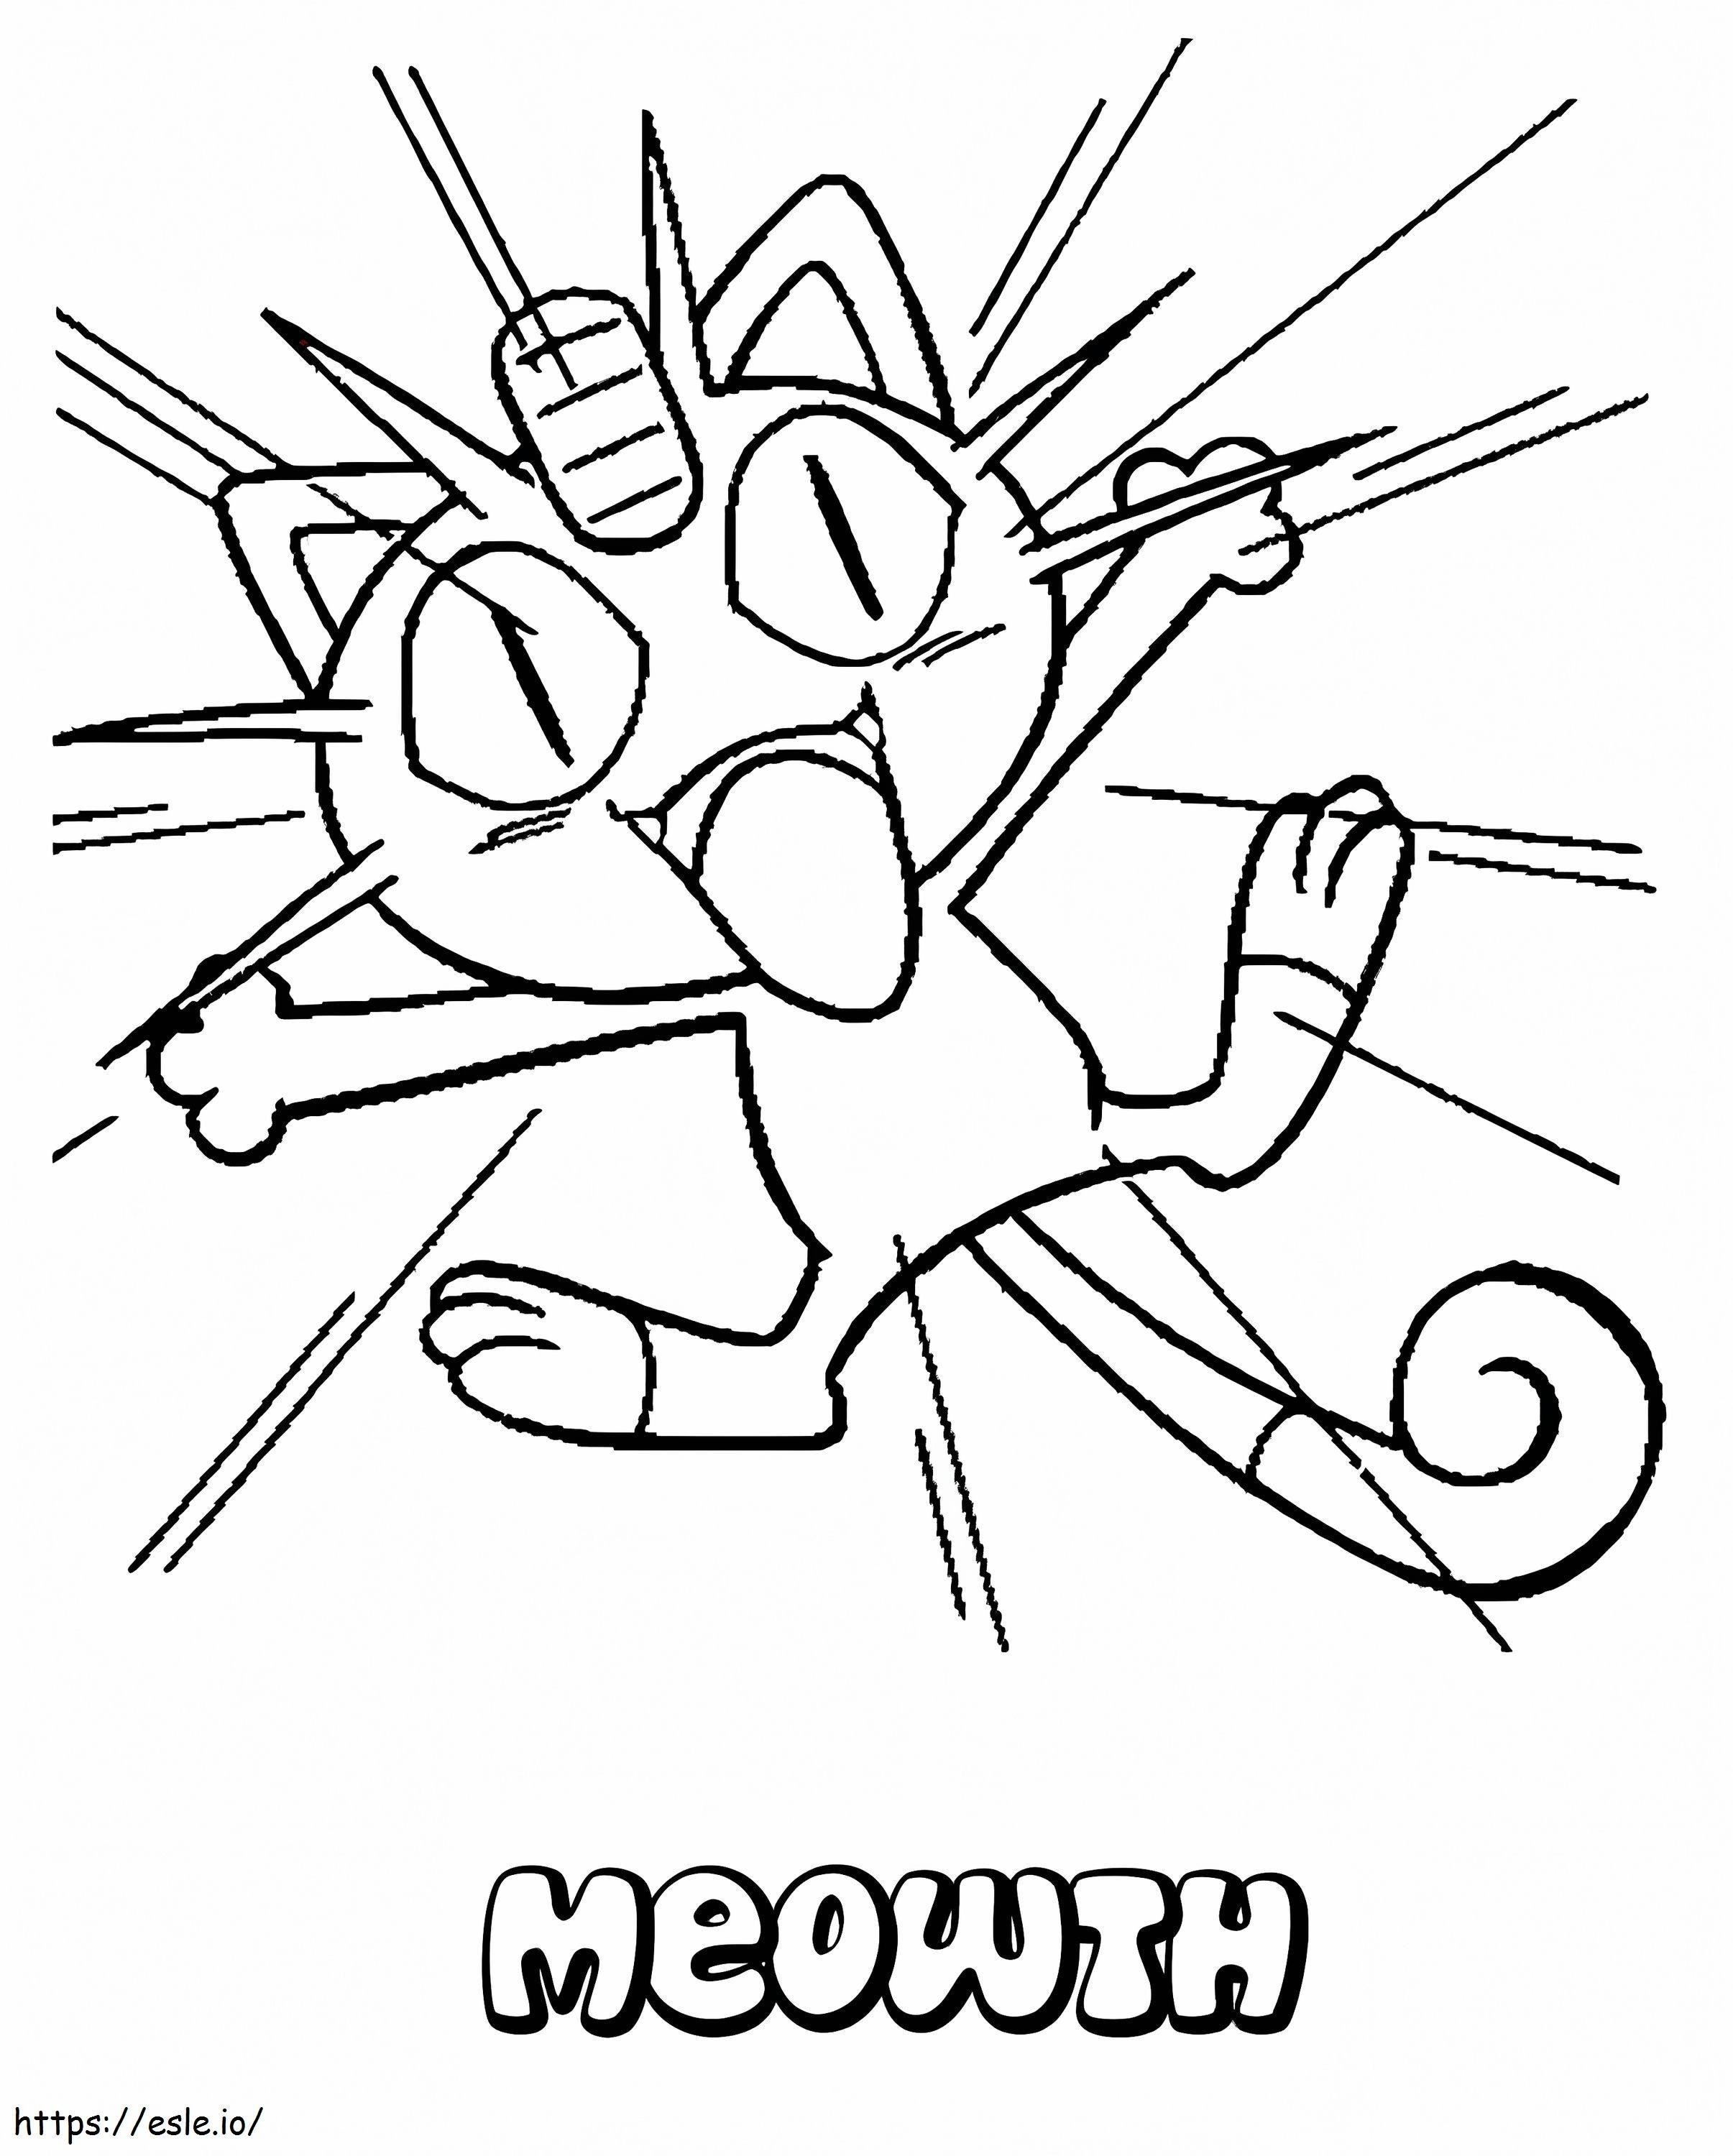 Meowth 6 coloring page